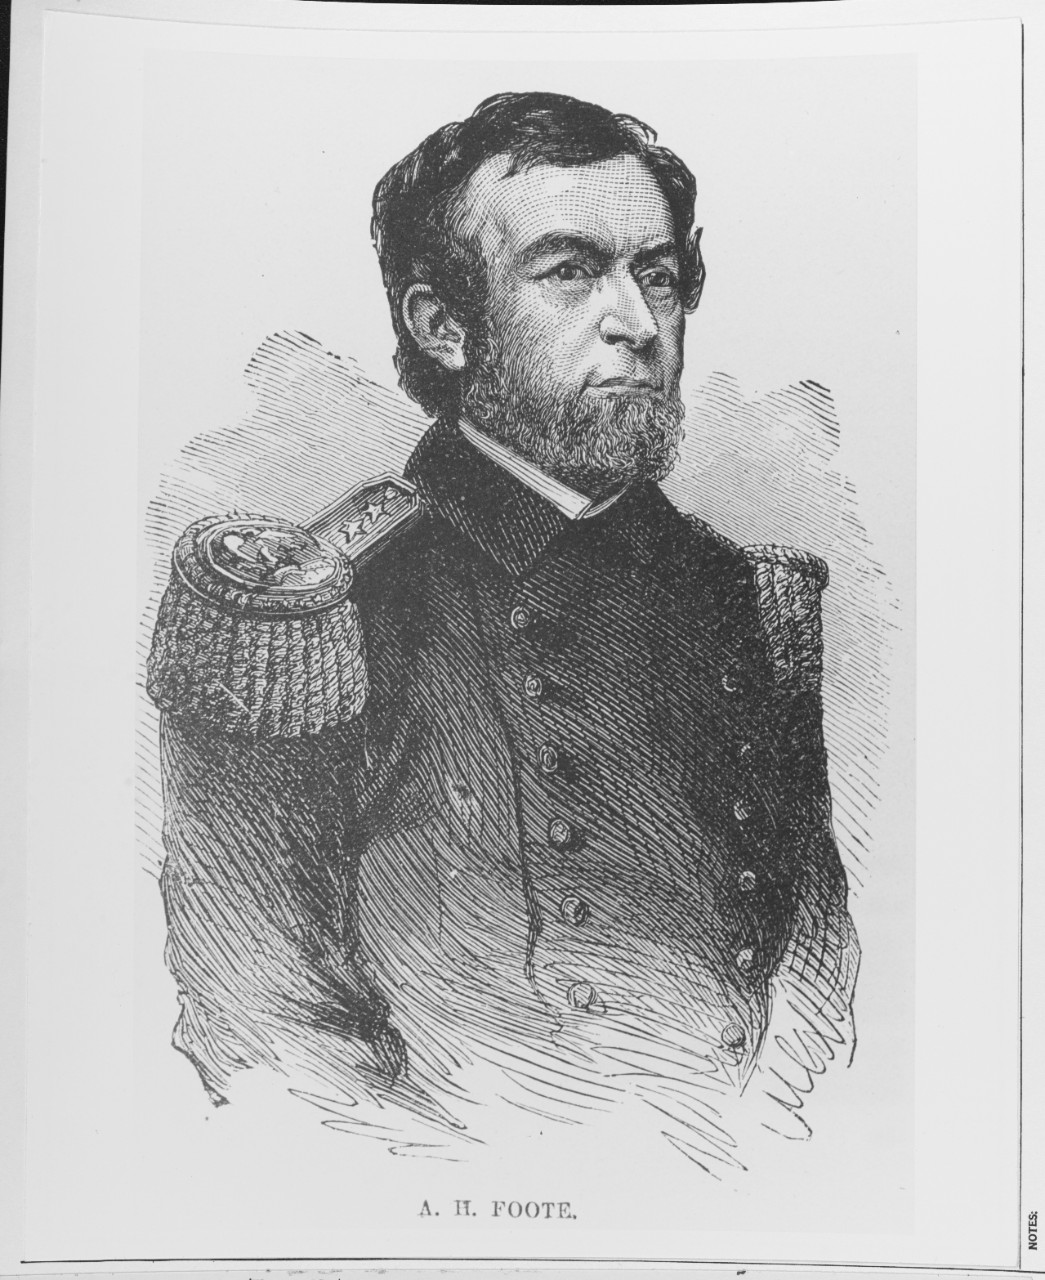 Rear Admiral Andrew Hull Foote, USN